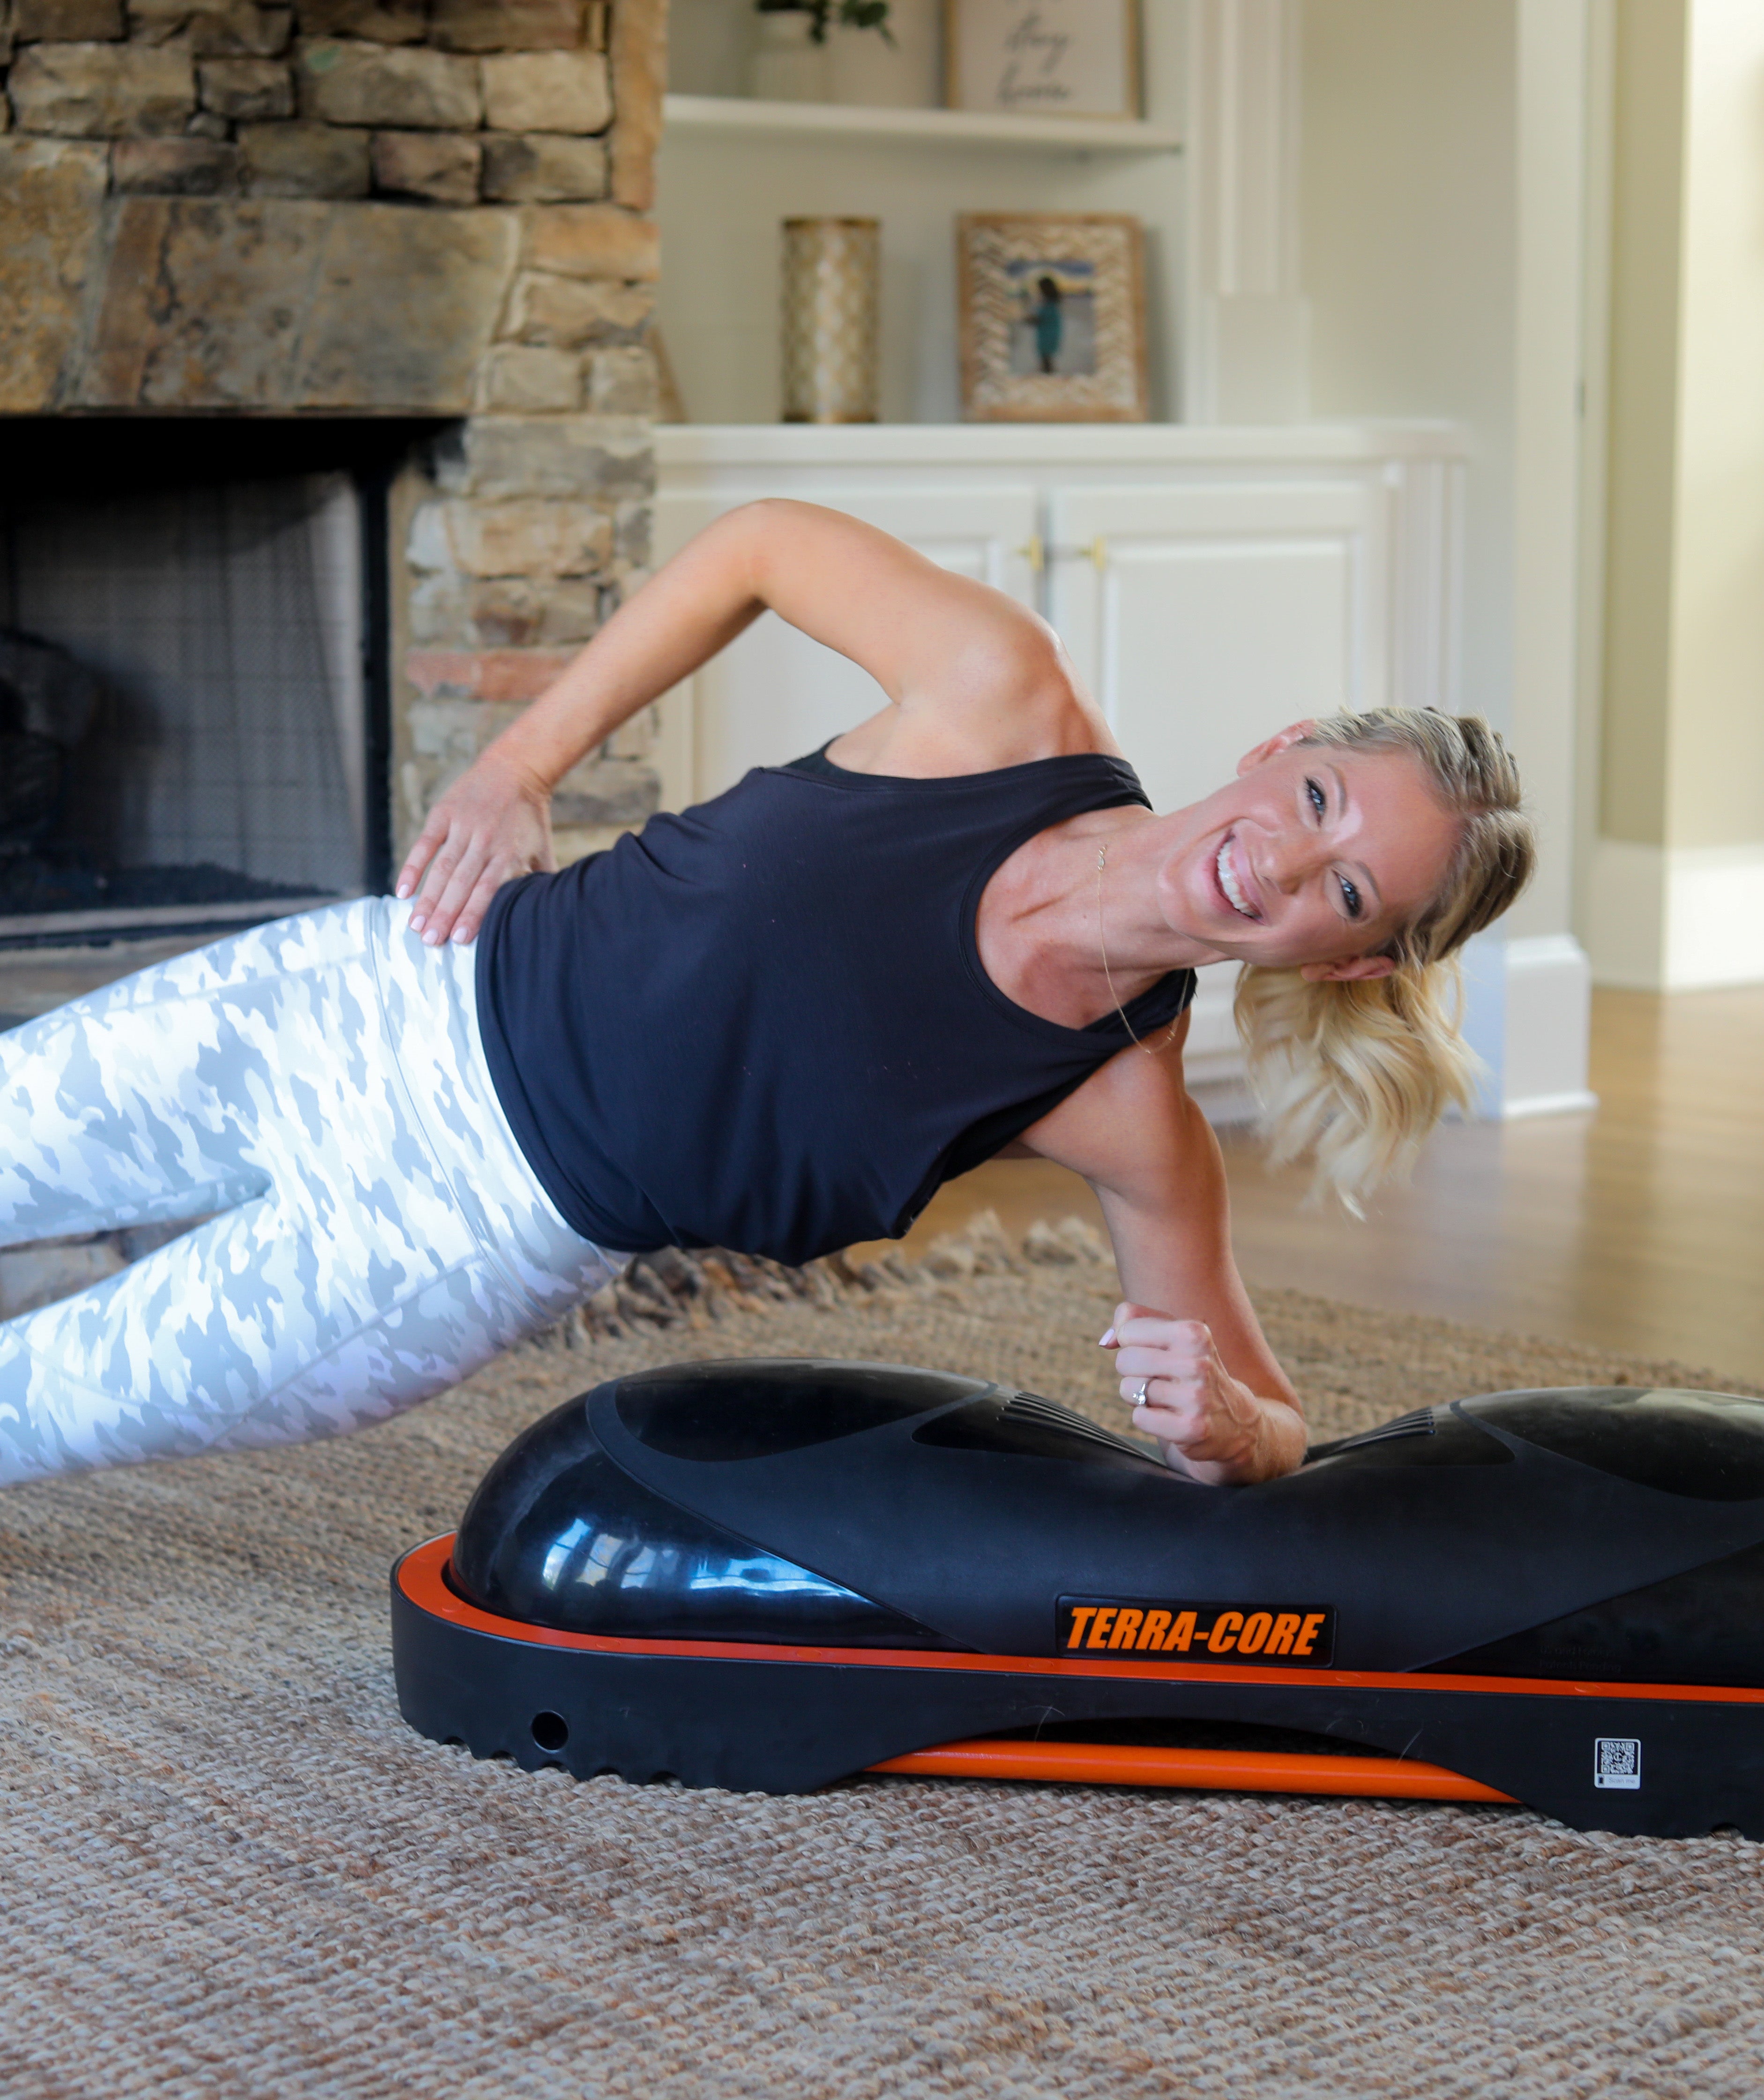 Top 10 For Trainers – Home Use. Balance Terra-Core Fitness